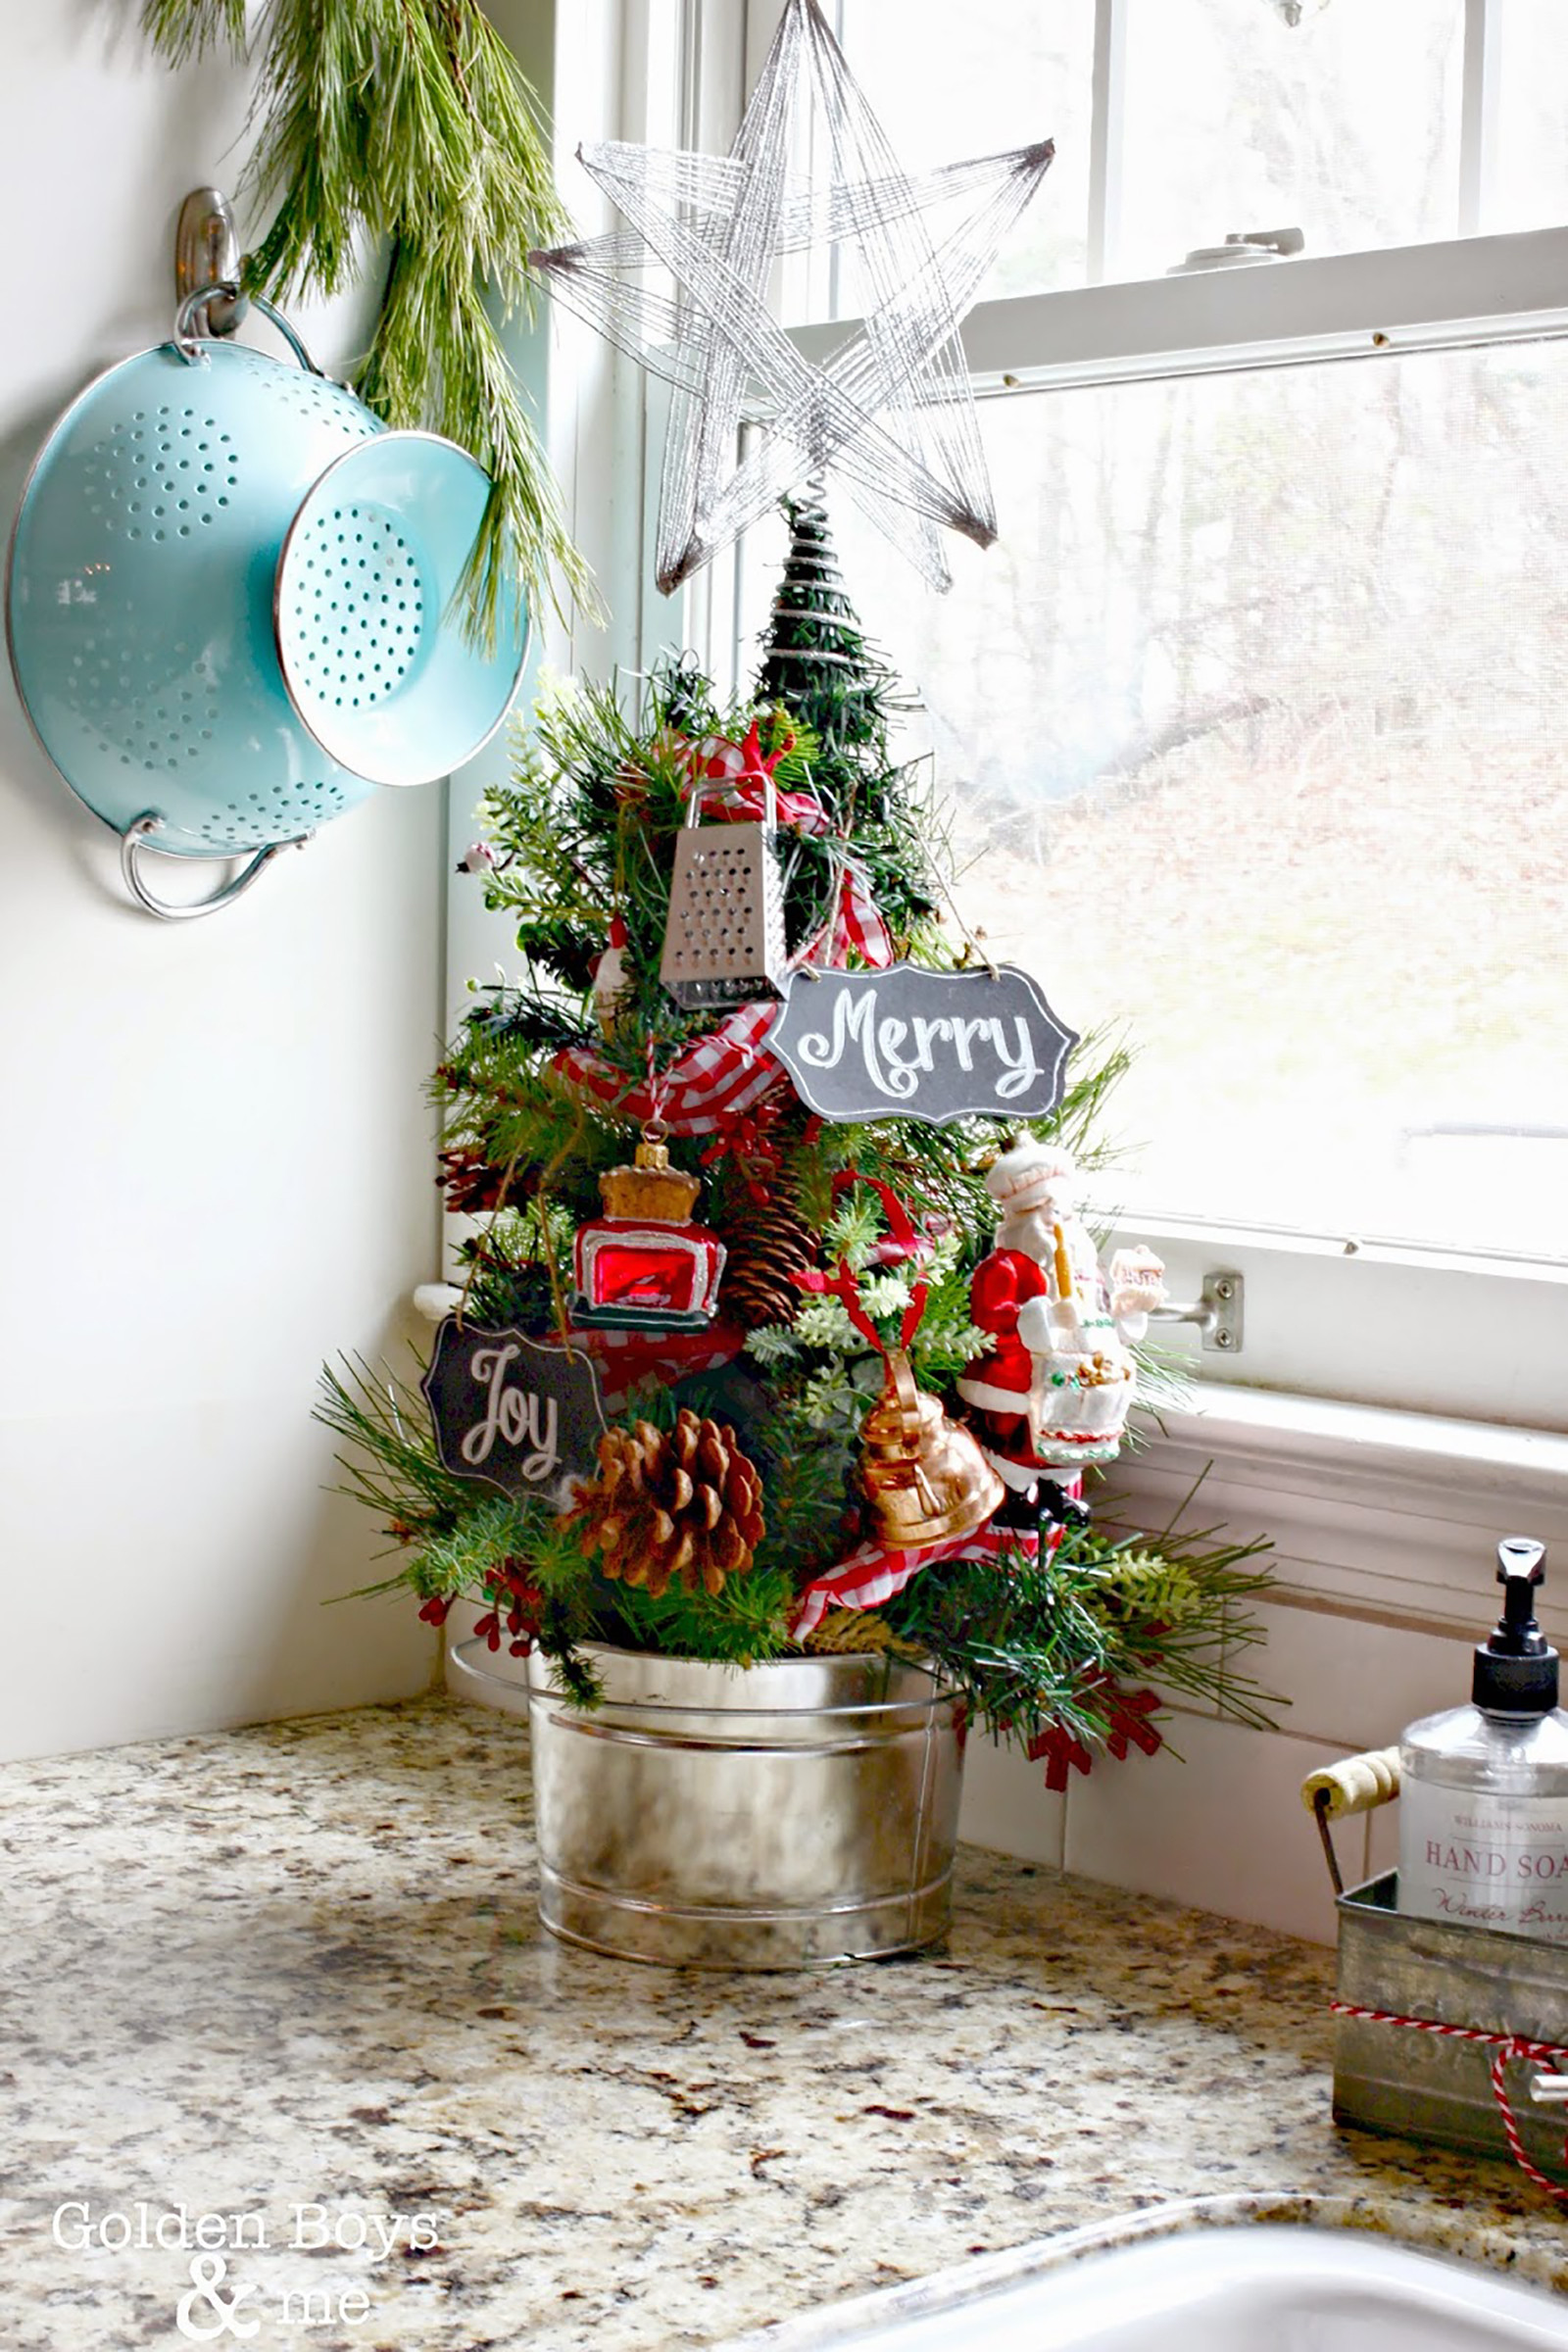 Kitchen Christmas Tree
 15 Best Small Christmas Trees Ideas for Decorating Mini